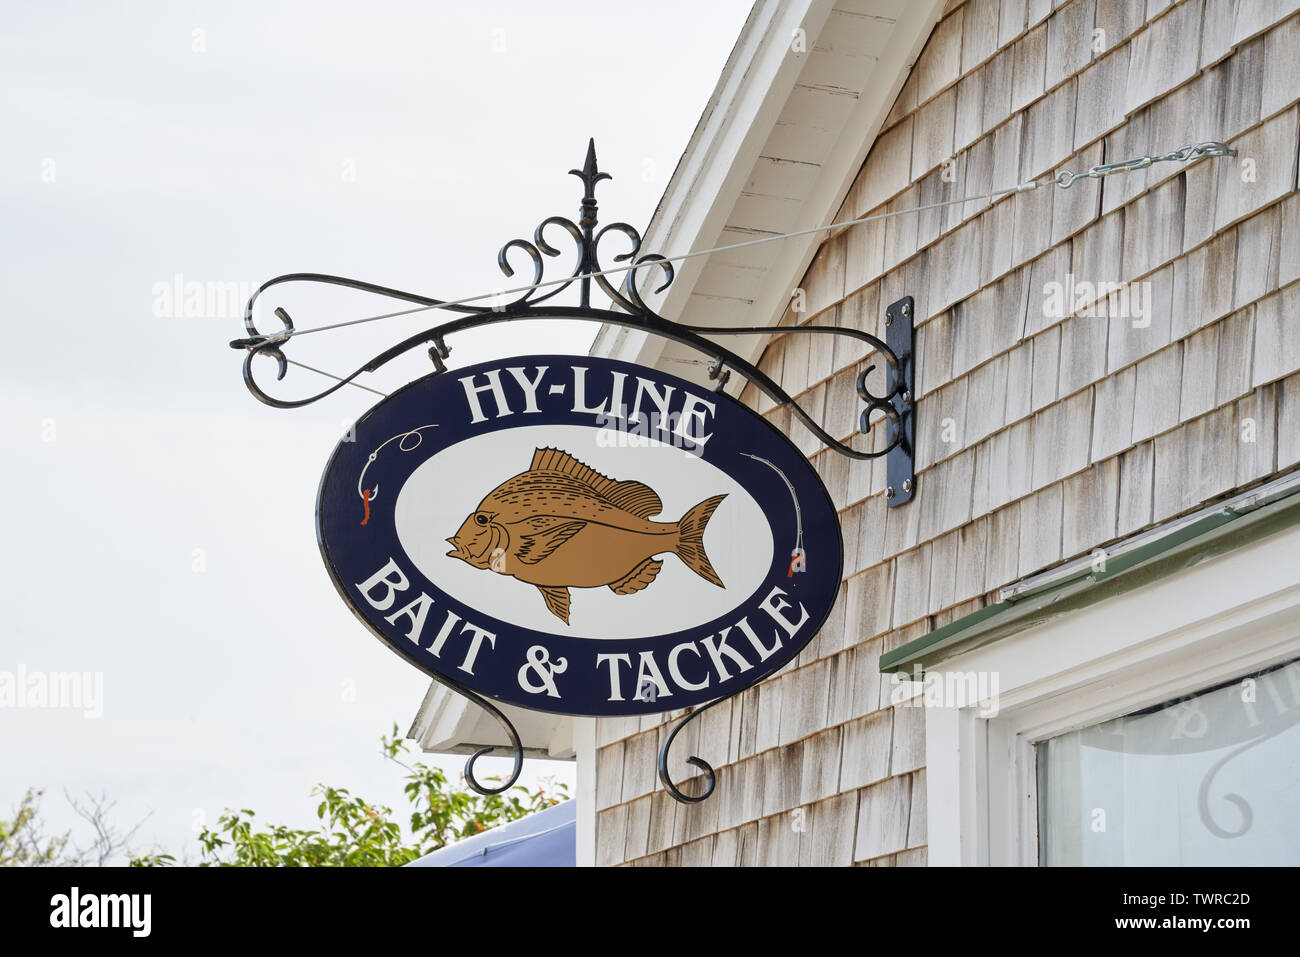 Hyannis, MA - June 10, 2019: Hy-Line Bait & Tackle is a shop selling all  kinds of fishing supplies and accessories located at the harbor Stock Photo  - Alamy